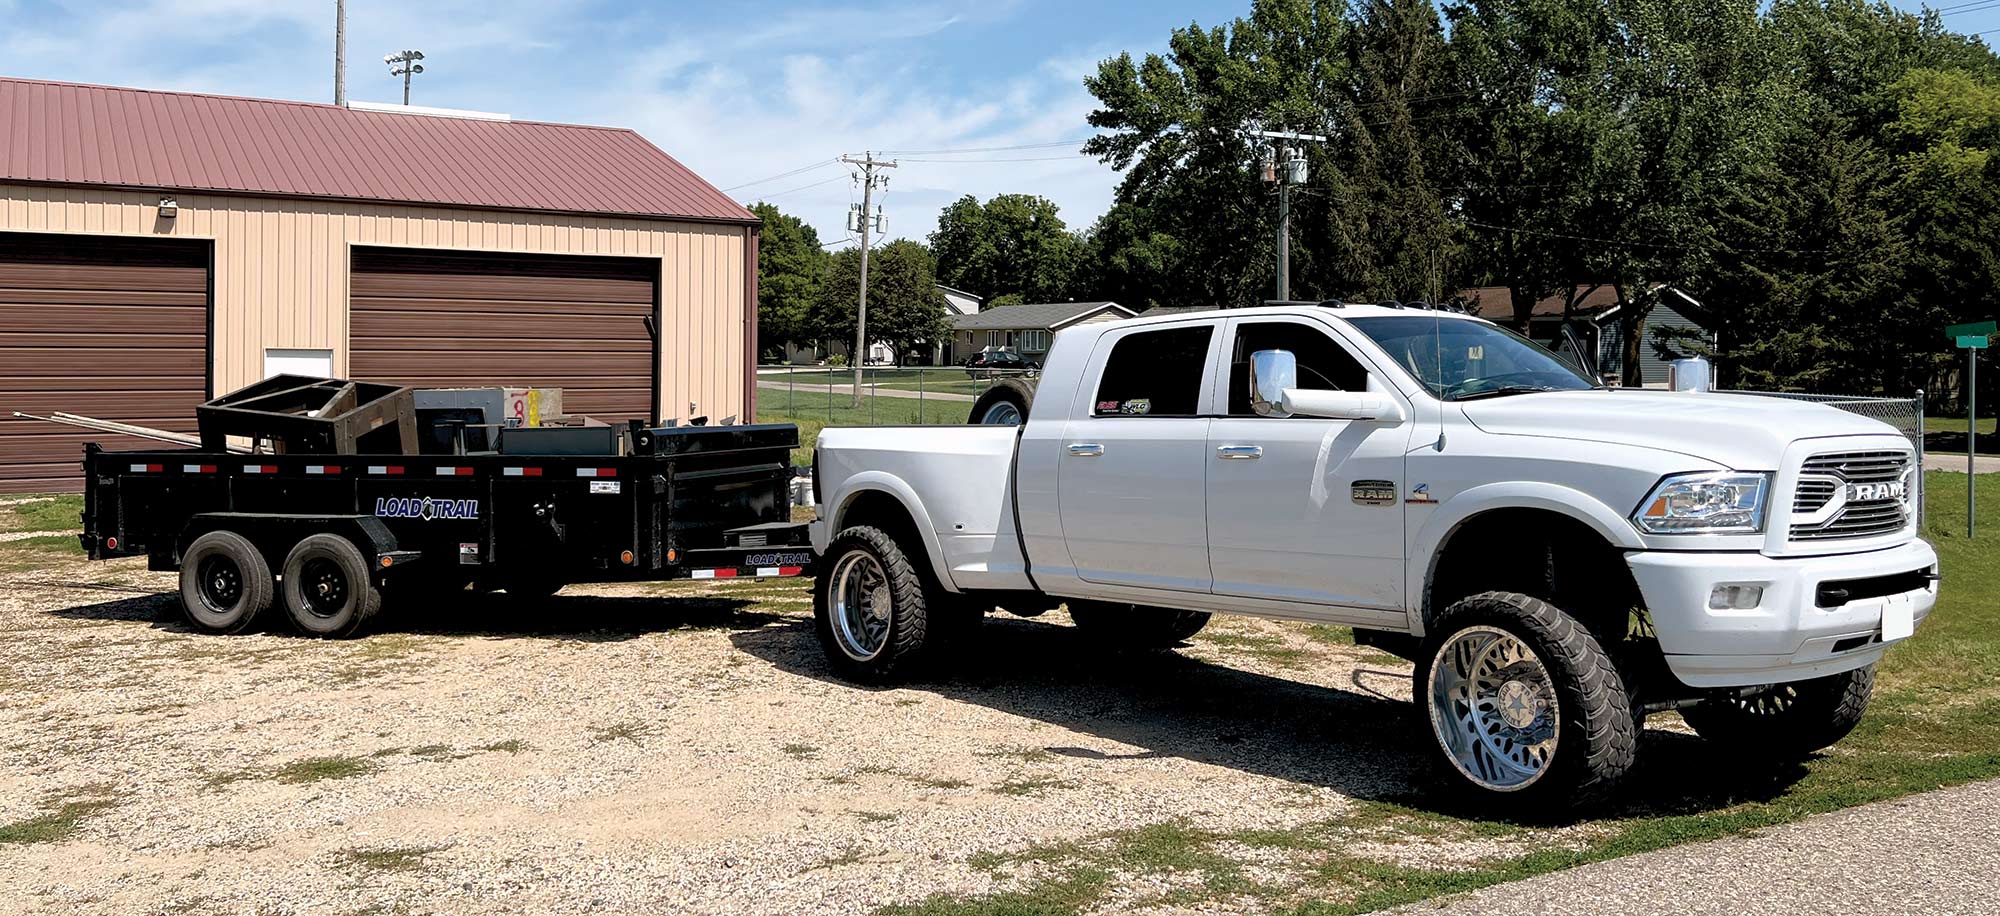 RAM truck with trailer hitched behind it